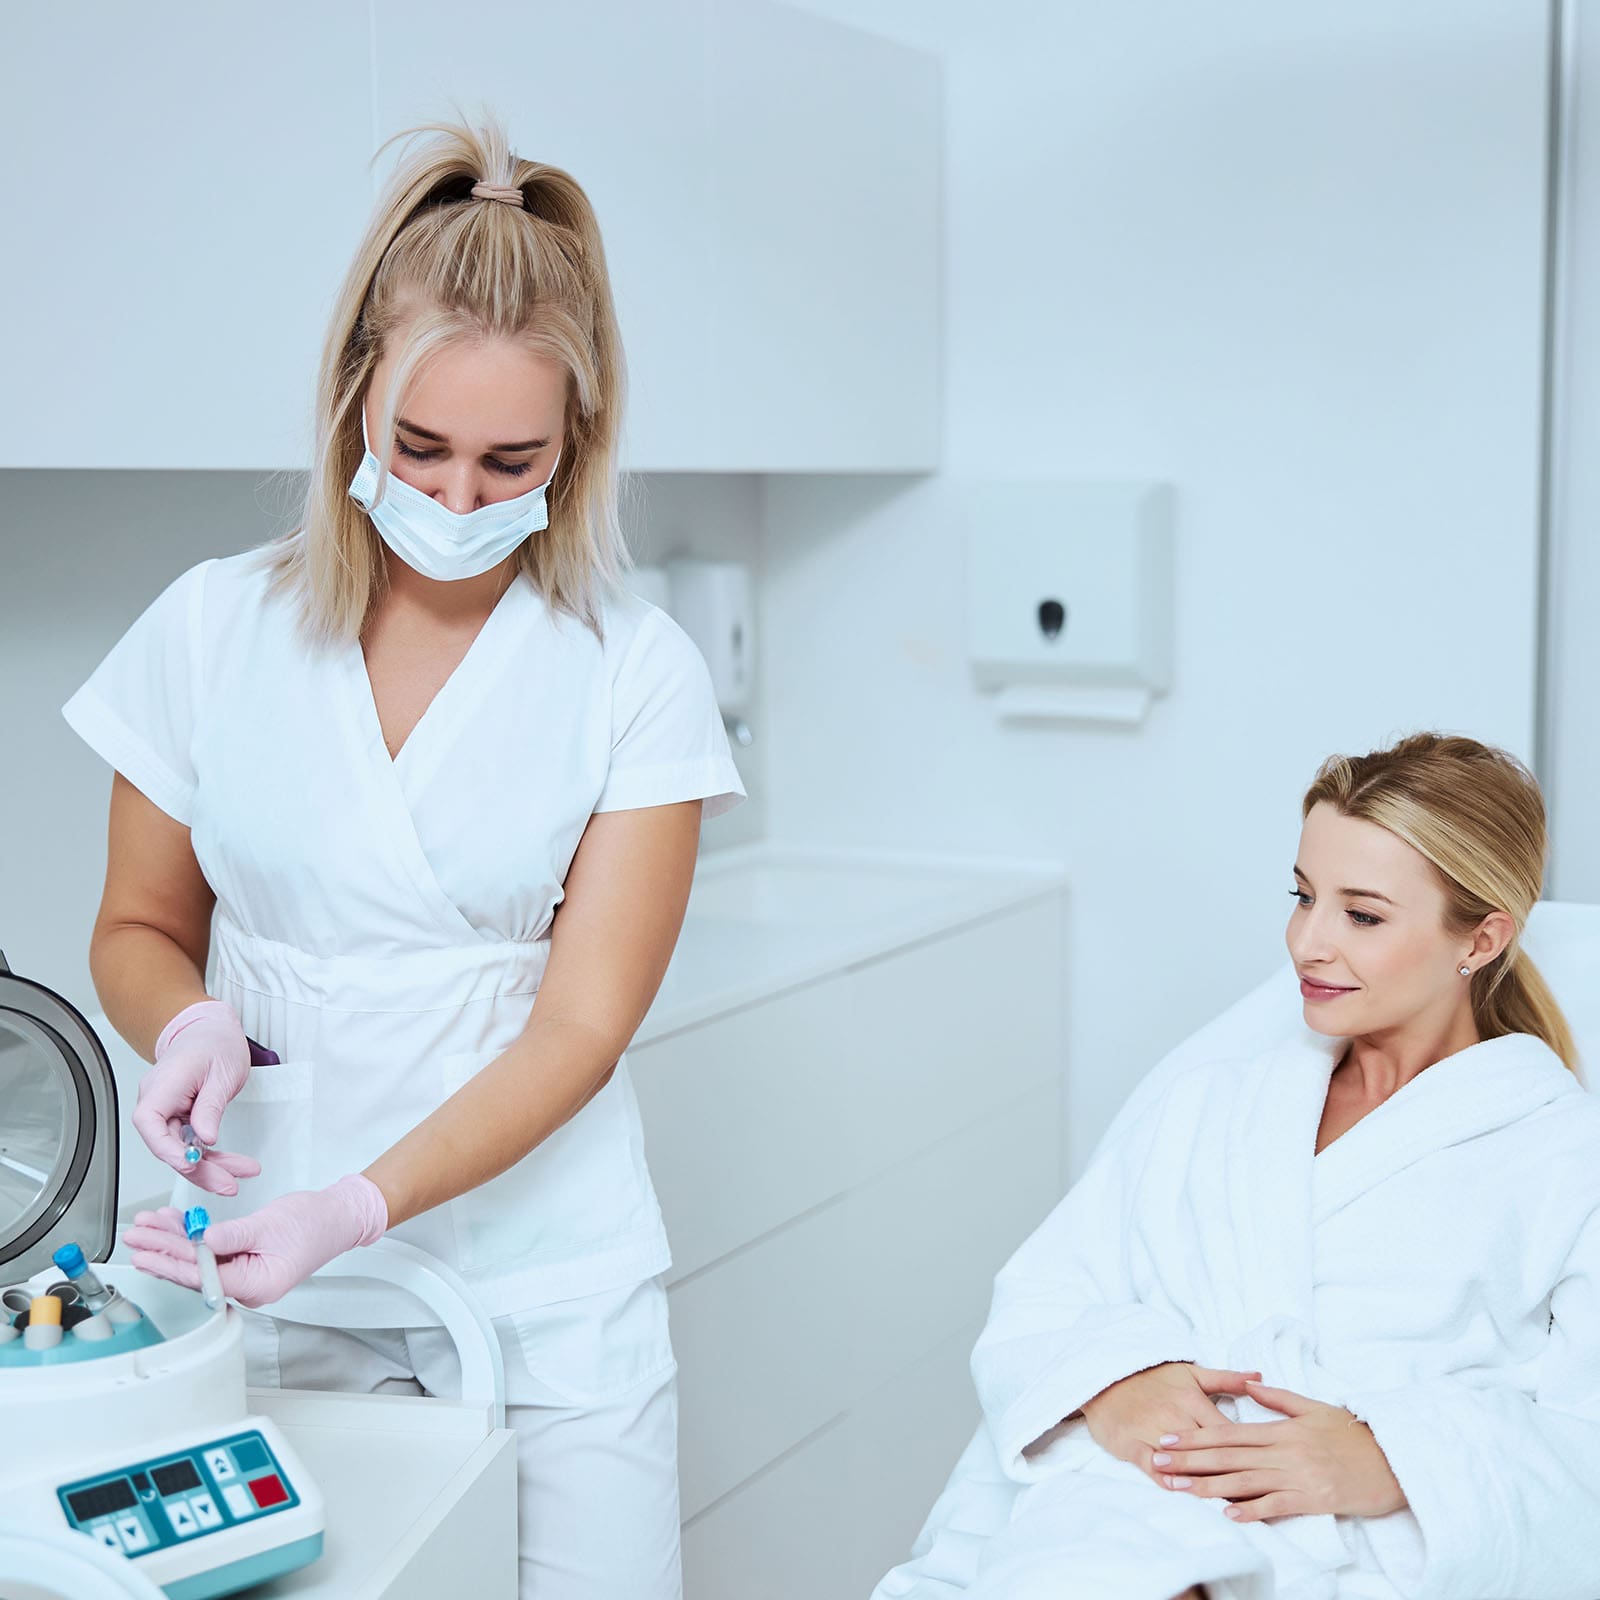 Aesthetician getting ready for a platelet-rich plasma injection as patient looks on